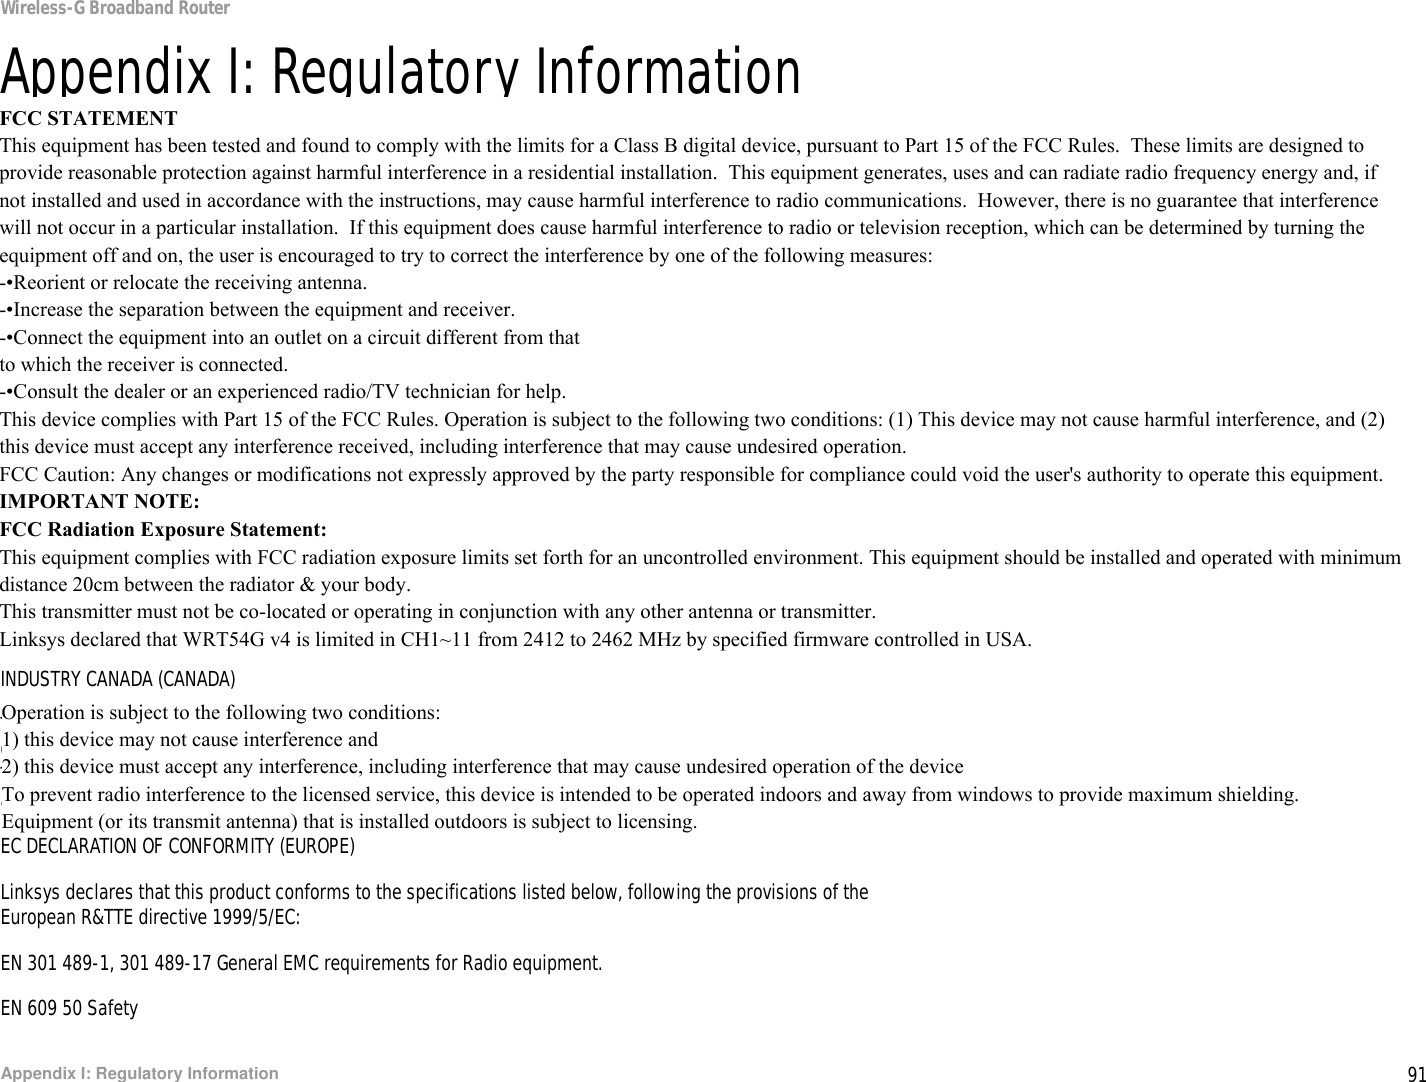 91Appendix I: Regulatory InformationWireless-G Broadband RouterAppendix I: Regulatory InformationFCC STATEMENTThis product has been tested and complies with the specifications for a Class B digital device, pursuant to Part 15 of the FCC Rules. These limits are designed to provide reasonable protection against harmful interference in a residential installation. This equipment generates, uses, and can radiate radio frequency energy and, if not installed and used according to the instructions, may cause harmful interference to radio communications. However, there is no guarantee that interference will not occur in a particular installation. If this equipment does cause harmful interference to radio or television reception, which is found by turning the equipment off and on, the user is encouraged to try to correct the interference by one or more of the following measures:Reorient or relocate the receiving antennaIncrease the separation between the equipment or devicesConnect the equipment to an outlet other than the receiver&apos;sConsult a dealer or an experienced radio/TV technician for assistanceFCC Radiation Exposure StatementThis equipment complies with FCC radiation exposure limits set forth for an uncontrolled environment.  This equipment should be installed and operated with minimum distance 20cm between the radiator and your body.INDUSTRY CANADA (CANADA)This Class B digital apparatus complies with Canadian ICES-003, RSS210.Cet appareil numérique de la classe B est conforme à la norme NMB-003 du Canada.The use of this device in a system operating either partially or completely outdoors may require the user to obtain a license for the system according to the Canadian regulations.EC DECLARATION OF CONFORMITY (EUROPE)Linksys declares that this product conforms to the specifications listed below, following the provisions of the European R&amp;TTE directive 1999/5/EC: EN 301 489-1, 301 489-17 General EMC requirements for Radio equipment.EN 609 50 SafetyFCC STATEMENTThis equipment has been tested and found to comply with the limits for a Class B digital device, pursuant to Part 15 of the FCC Rules.  These limits are designed to provide reasonable protection against harmful interference in a residential installation.  This equipment generates, uses and can radiate radio frequency energy and, if not installed and used in accordance with the instructions, may cause harmful interference to radio communications.  However, there is no guarantee that interference will not occur in a particular installation.  If this equipment does cause harmful interference to radio or television reception, which can be determined by turning the equipment off and on, the user is encouraged to try to correct the interference by one of the following measures:-•Reorient or relocate the receiving antenna.-•Increase the separation between the equipment and receiver.-•Connect the equipment into an outlet on a circuit different from thatto which the receiver is connected.-•Consult the dealer or an experienced radio/TV technician for help.This device complies with Part 15 of the FCC Rules. Operation is subject to the following two conditions: (1) This device may not cause harmful interference, and (2) this device must accept any interference received, including interference that may cause undesired operation.FCC Caution: Any changes or modifications not expressly approved by the party responsible for compliance could void the user&apos;s authority to operate this equipment.IMPORTANT NOTE:FCC Radiation Exposure Statement:This equipment complies with FCC radiation exposure limits set forth for an uncontrolled environment. This equipment should be installed and operated with minimum distance 20cm between the radiator &amp; your body.This transmitter must not be co-located or operating in conjunction with any other antenna or transmitter.Linksys declared that WRT54G v4 is limited in CH1~11 from 2412 to 2462 MHz by specified firmware controlled in USA.Operation is subject to the following two conditions:1) this device may not cause interference and2) this device must accept any interference, including interference that may cause undesired operation of the deviceTo prevent radio interference to the licensed service, this device is intended to be operated indoors and away from windows to provide maximum shielding.Equipment (or its transmit antenna) that is installed outdoors is subject to licensing.